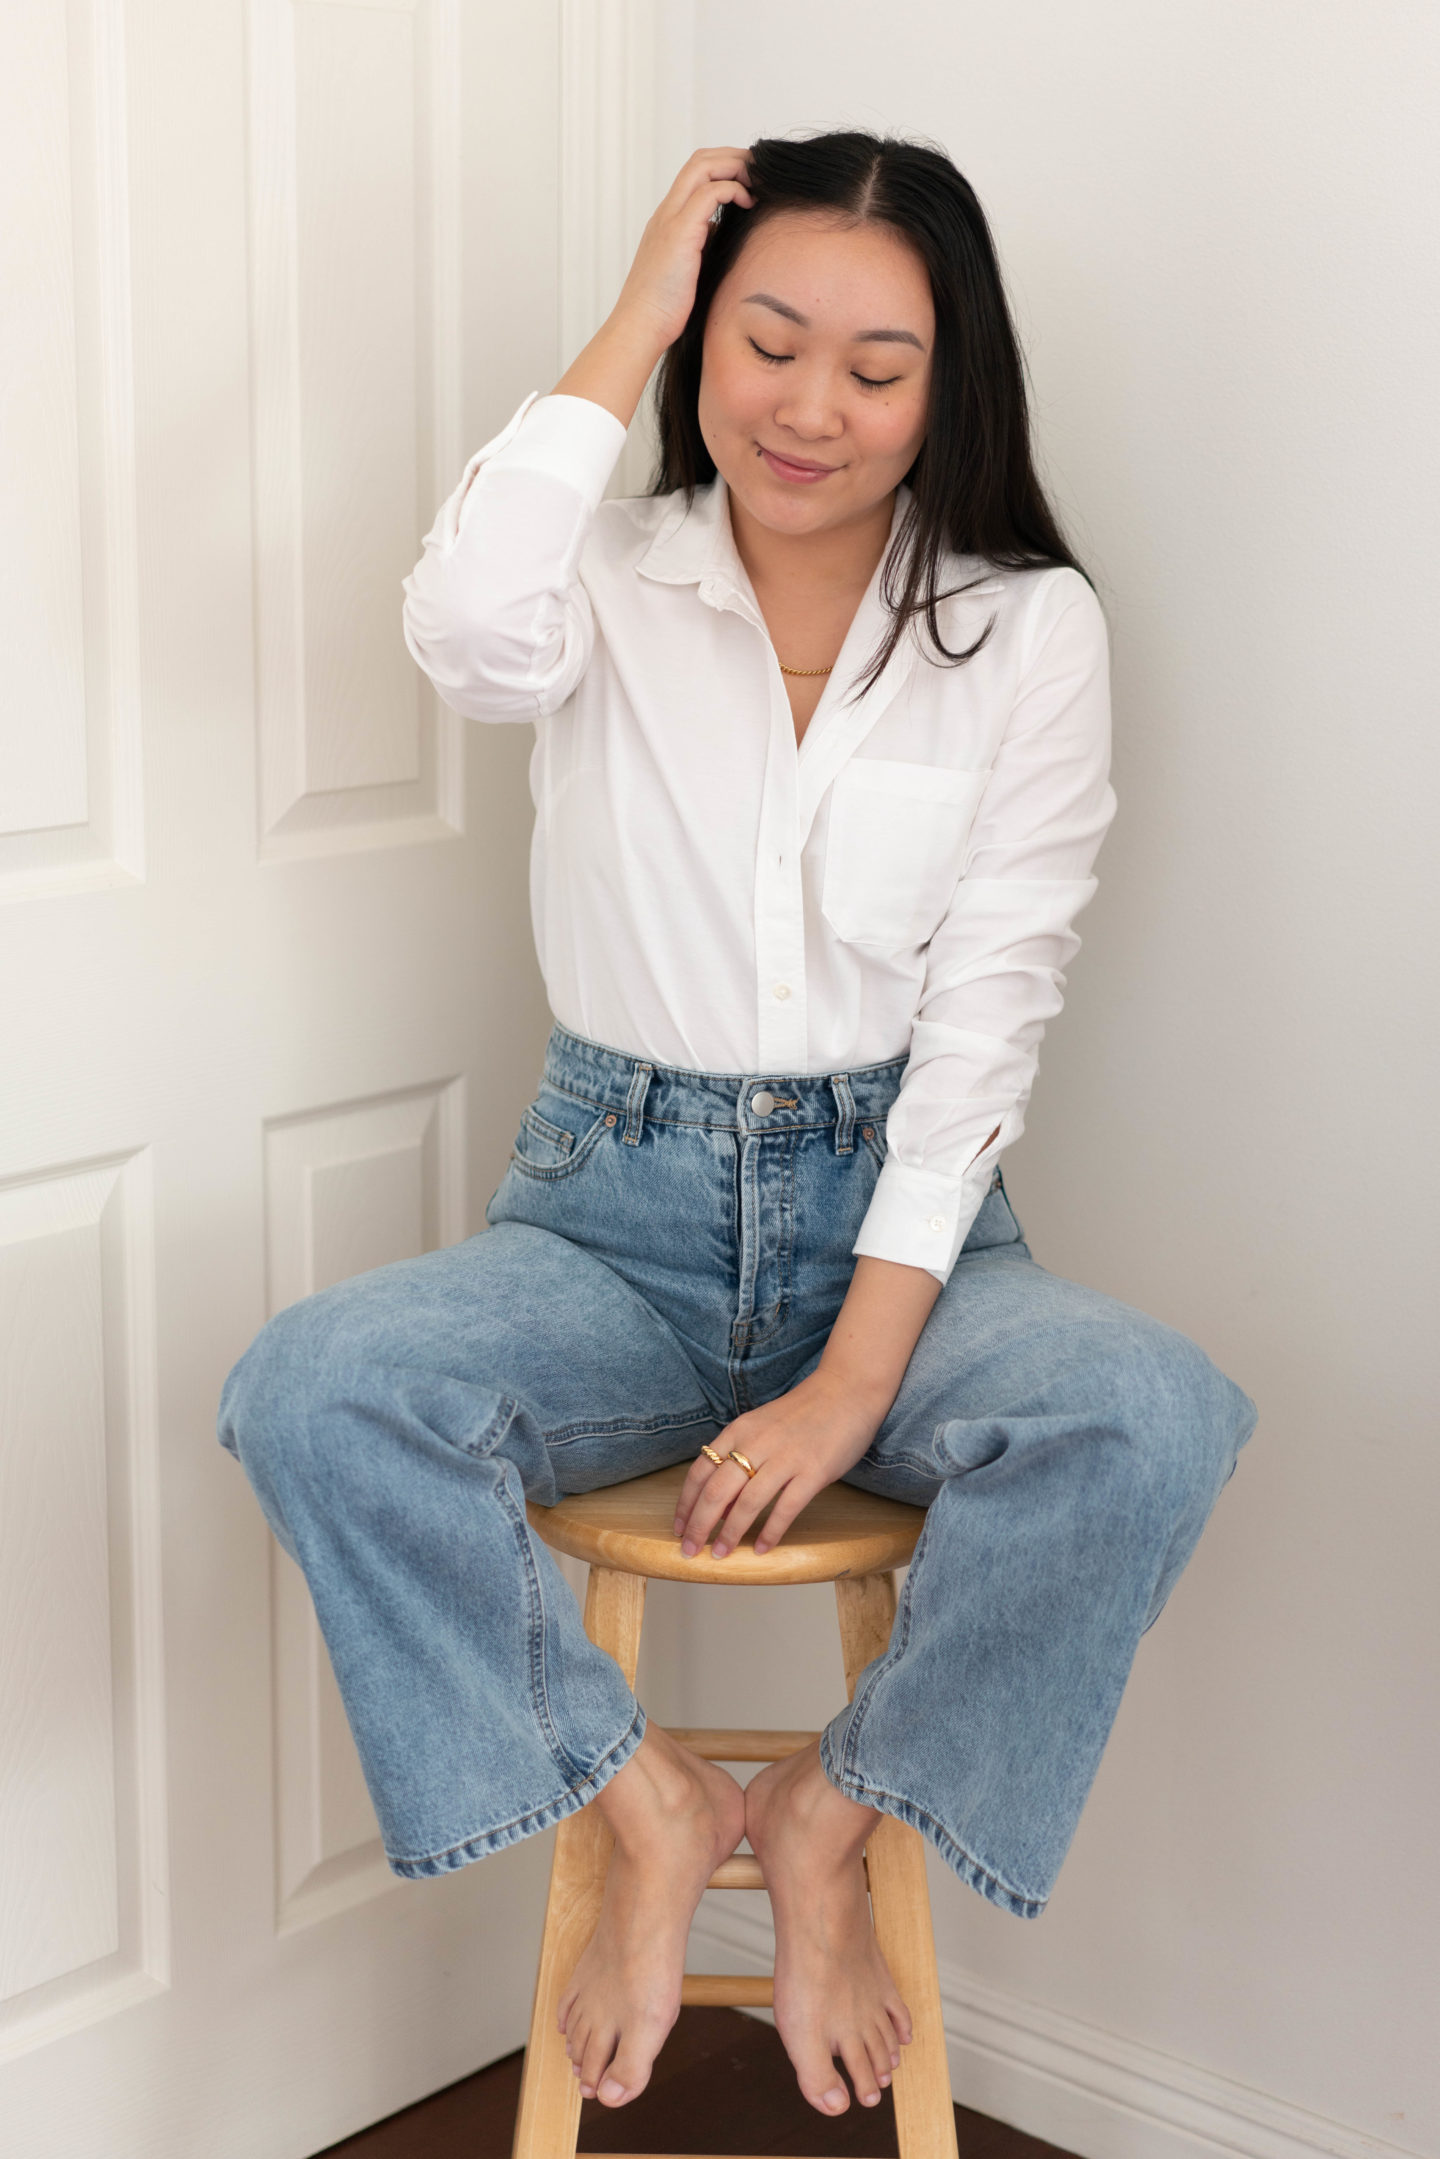 Sezane Tomboy Shirt, Wide Leg Jeans, GOTS Certified Shirt, 100% Organic Shirt, White Shirt and Jeans, Classic and Timeless Outfit, Simple and Chic Outfit, Heart Made of Gold Jewelry